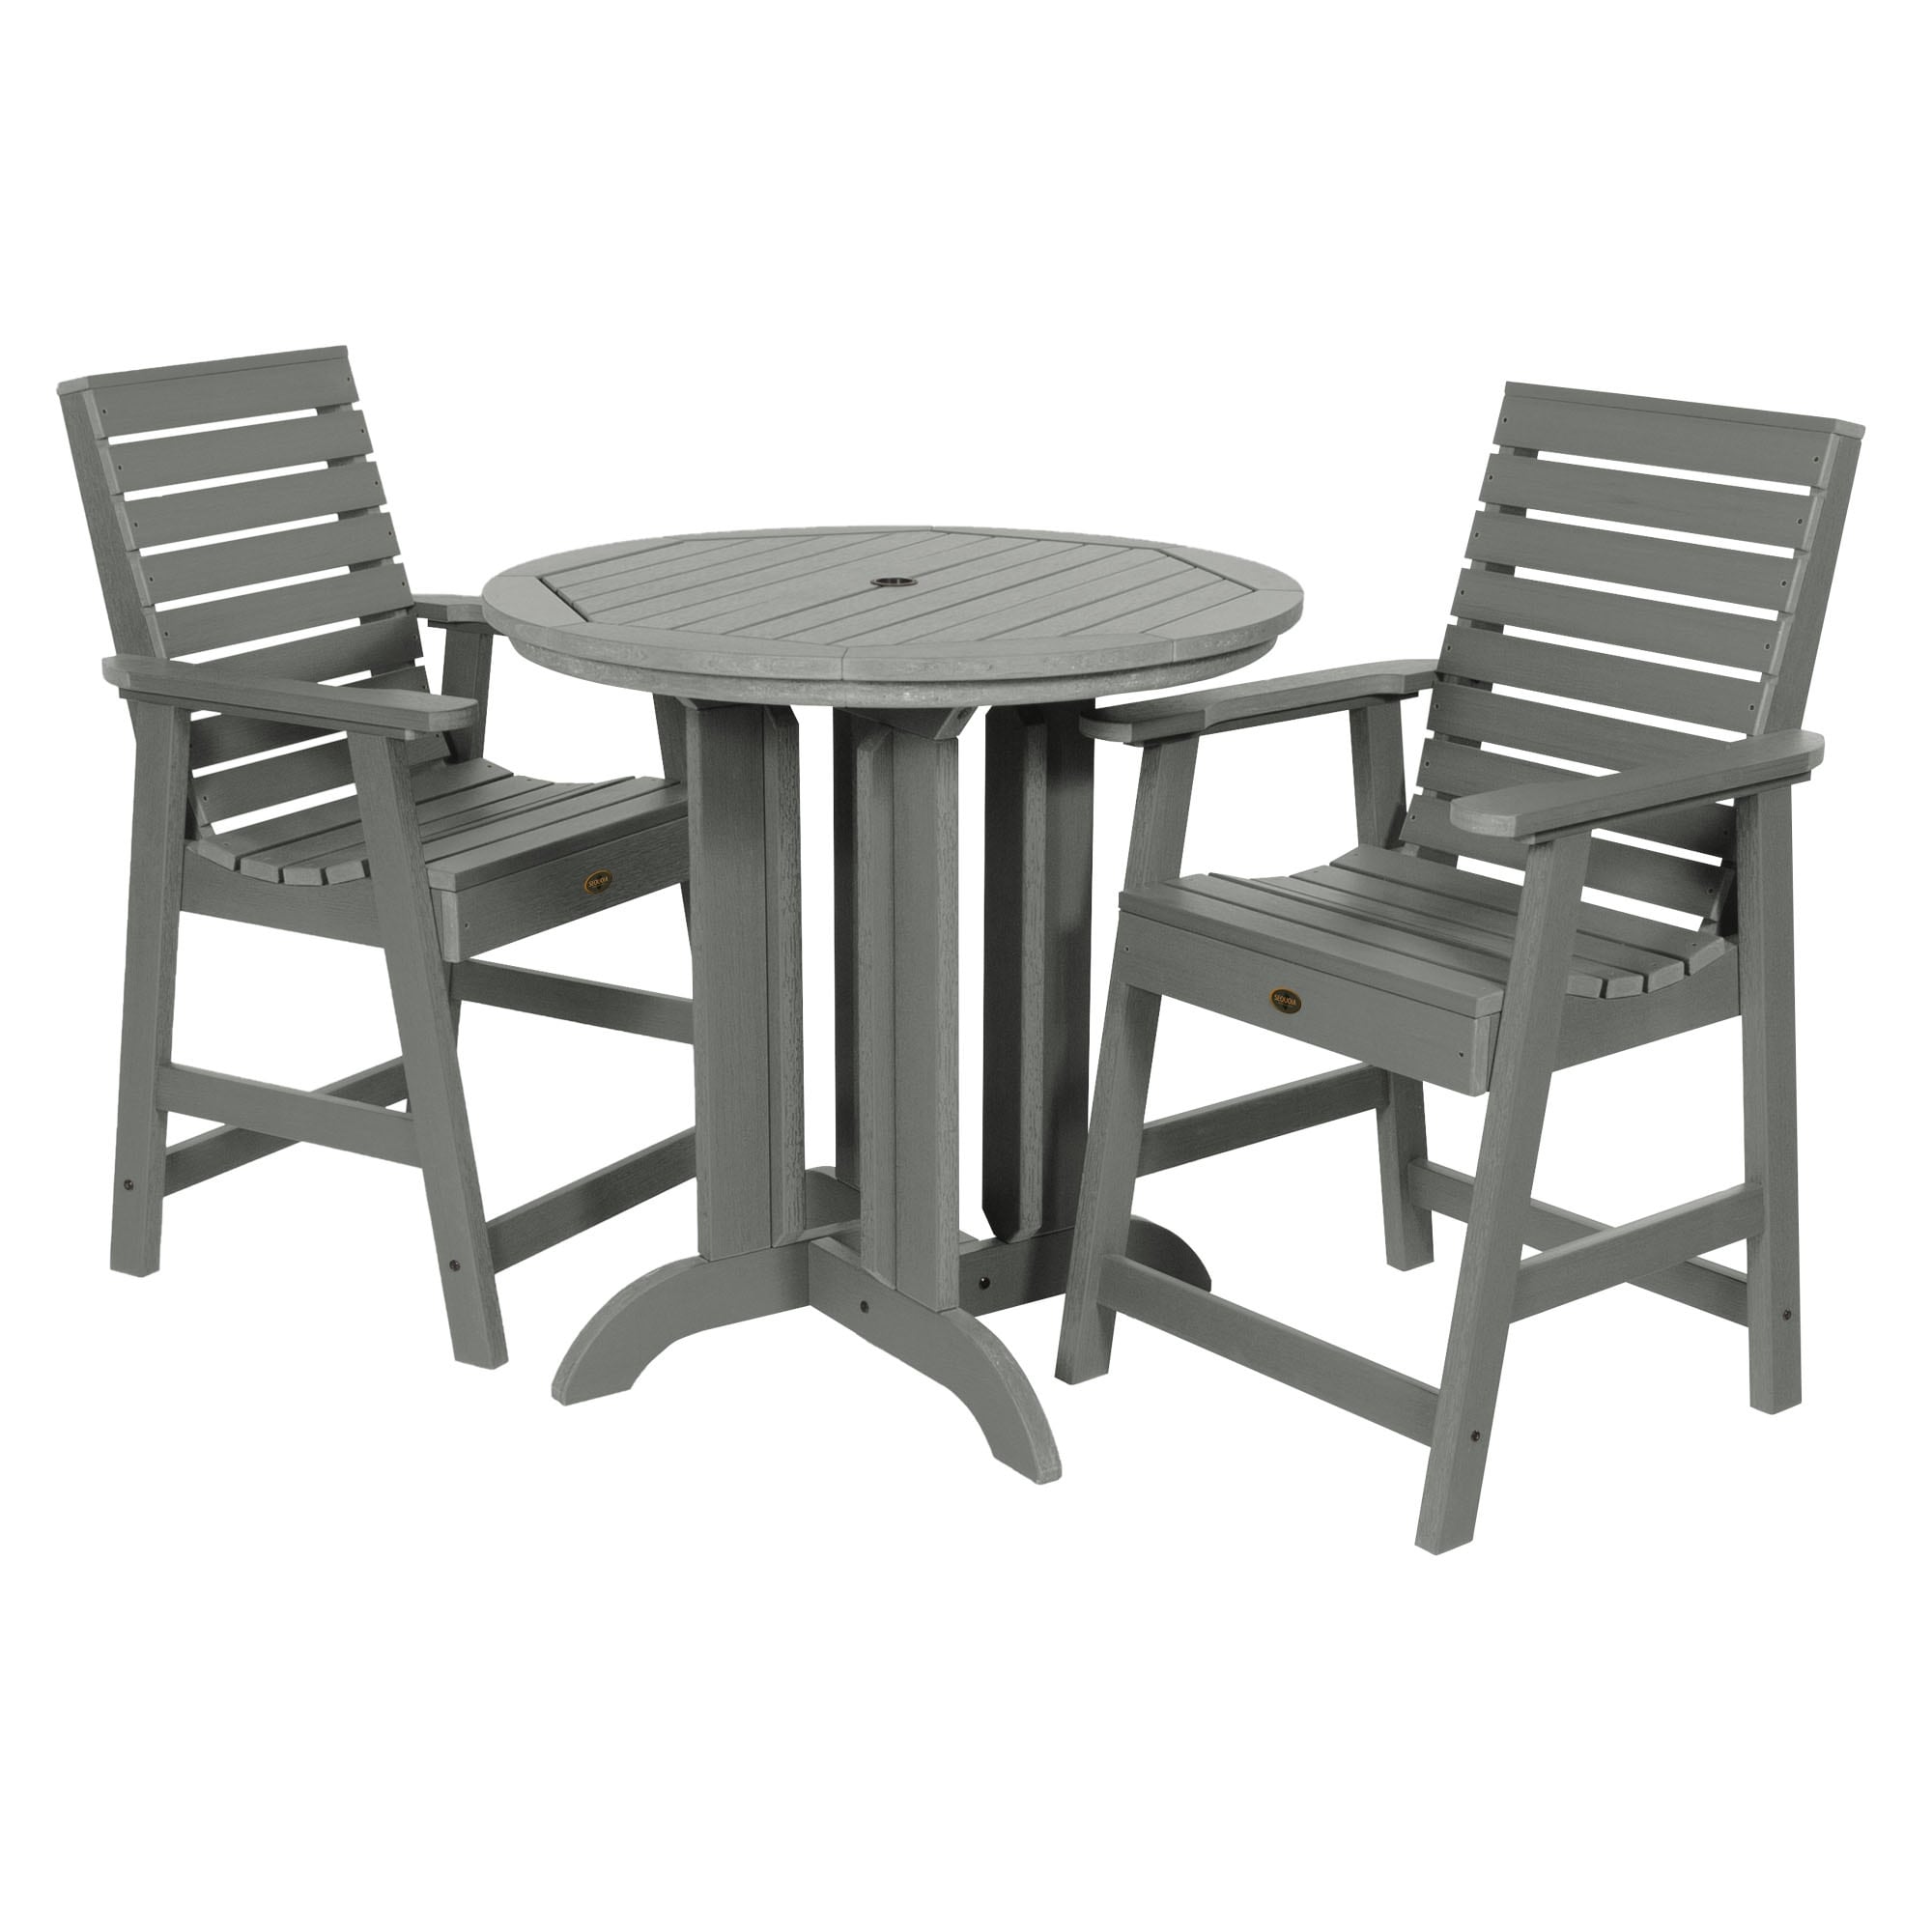 Highwood Commerical Glennville Three-piece Outdoor Dining Set